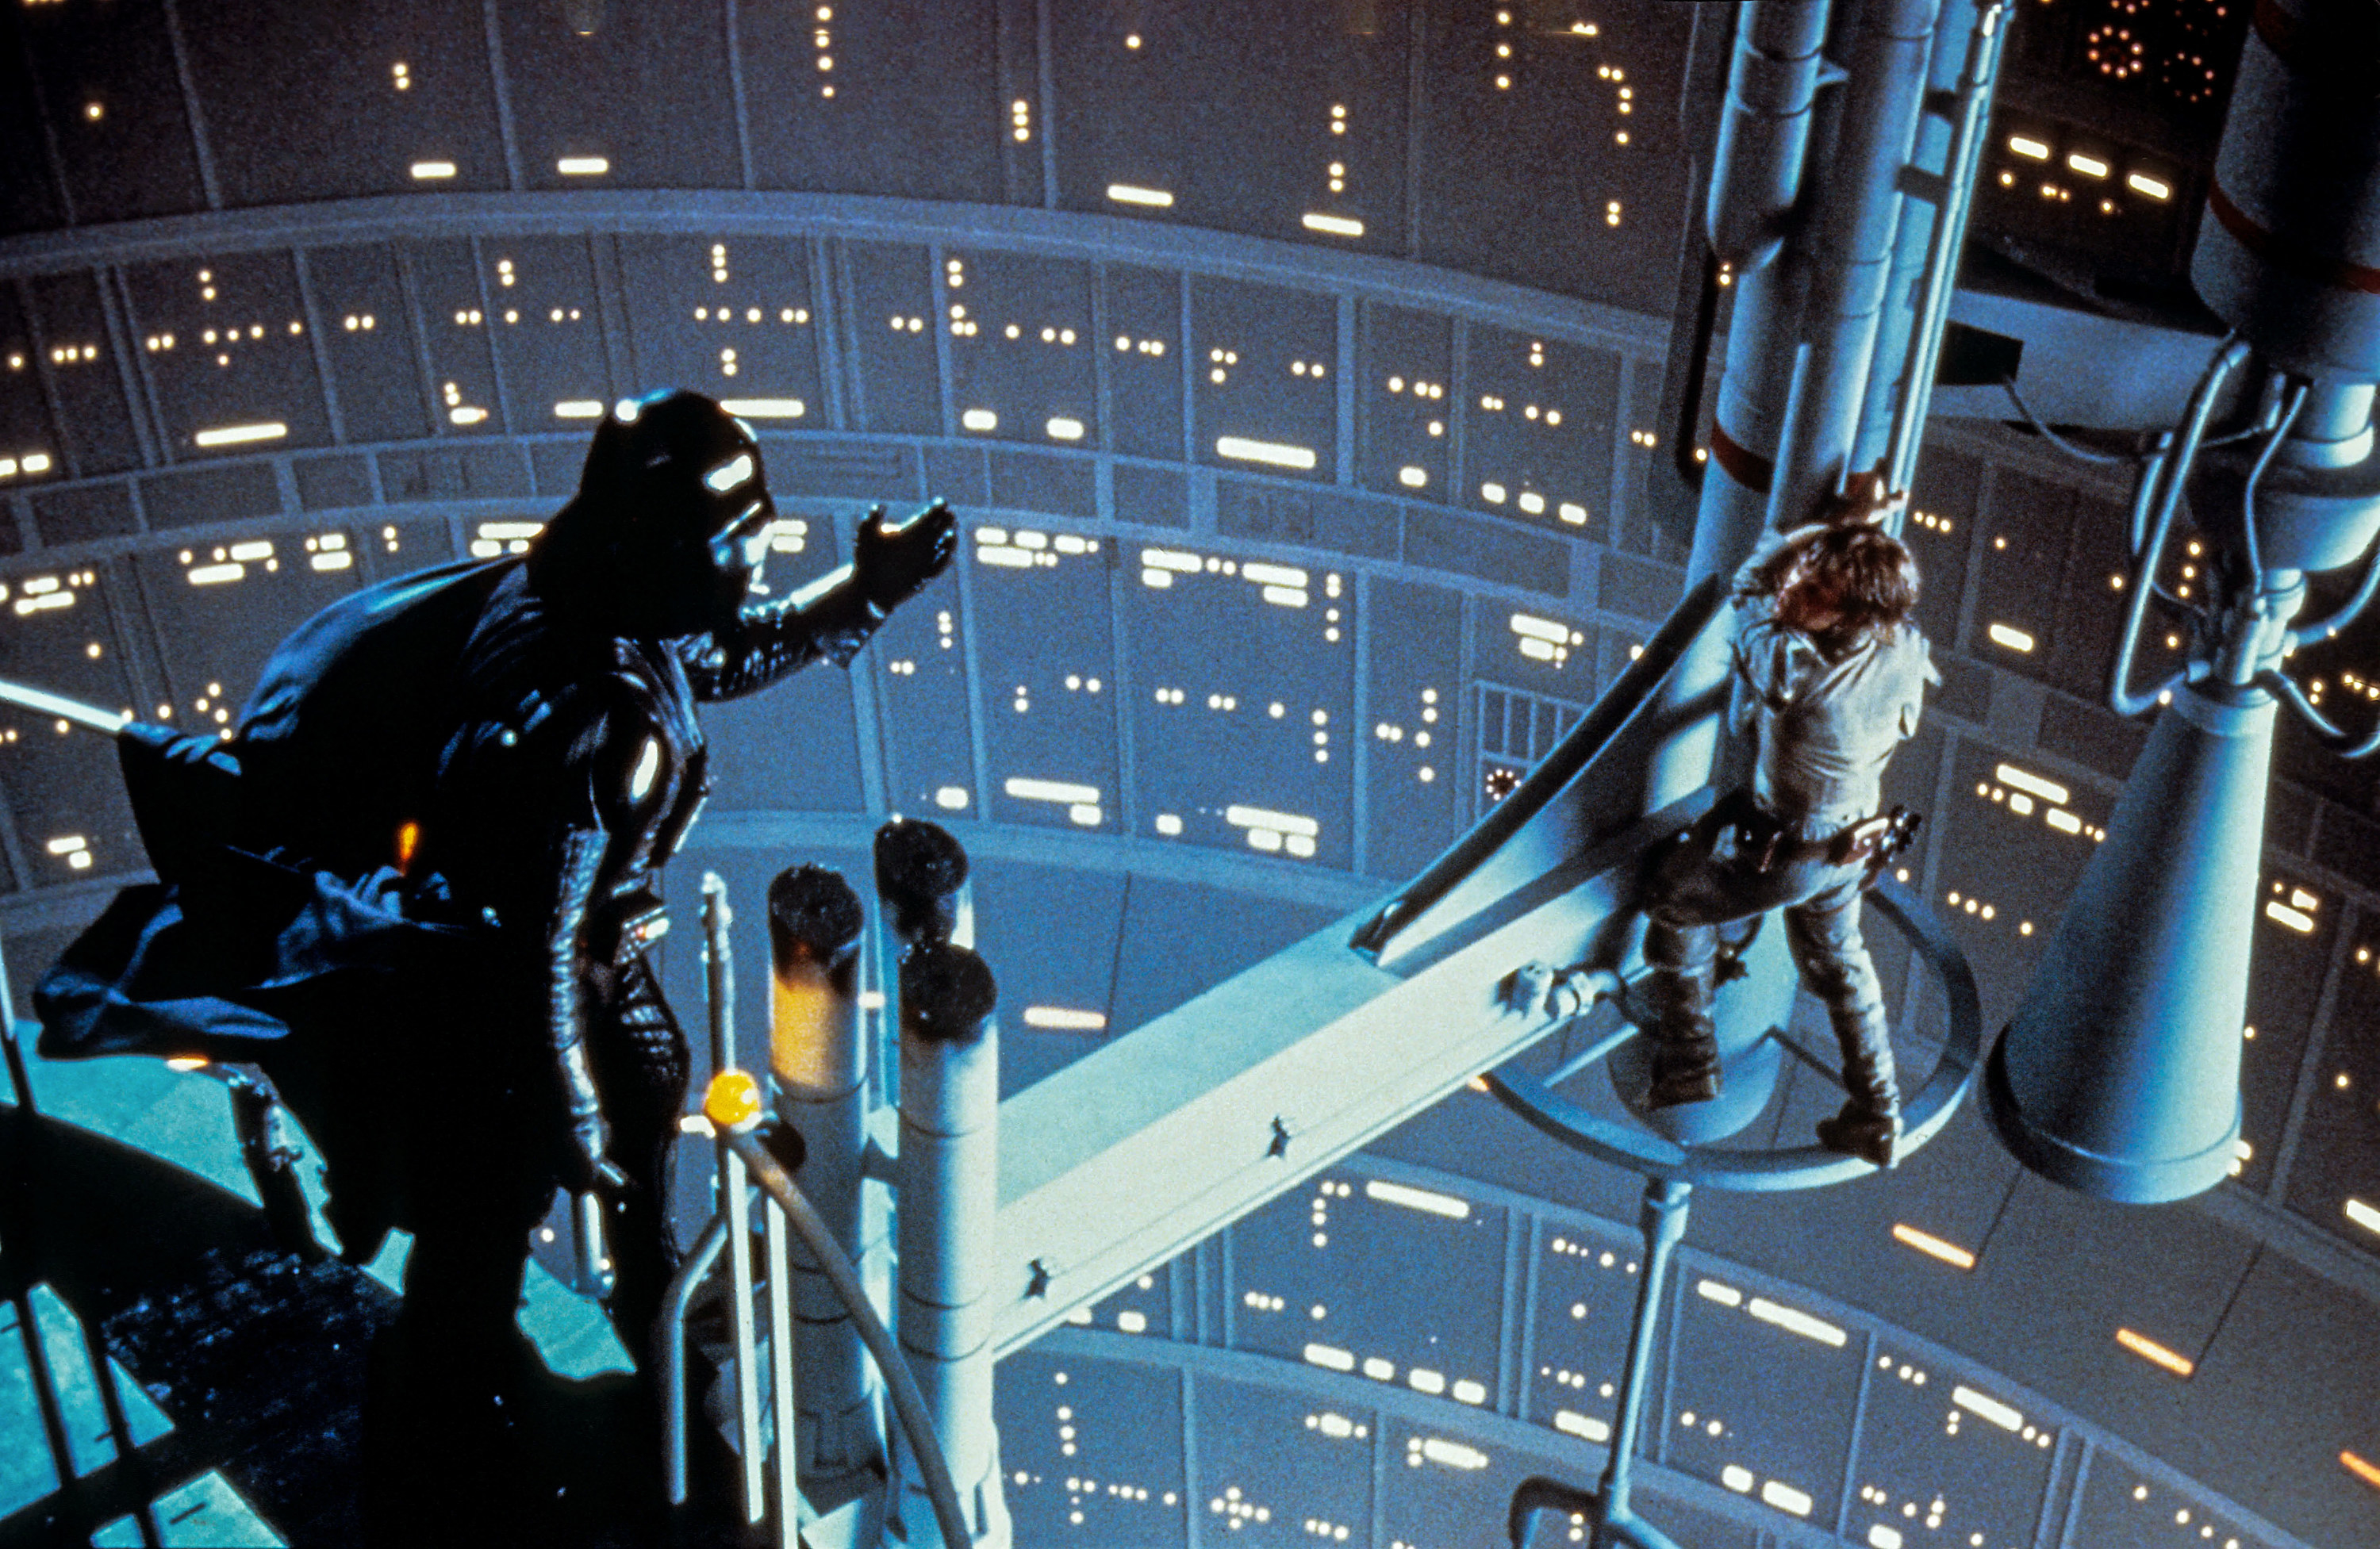 Darth Vader and Luke Skywalker looking across at each other on scaffolding